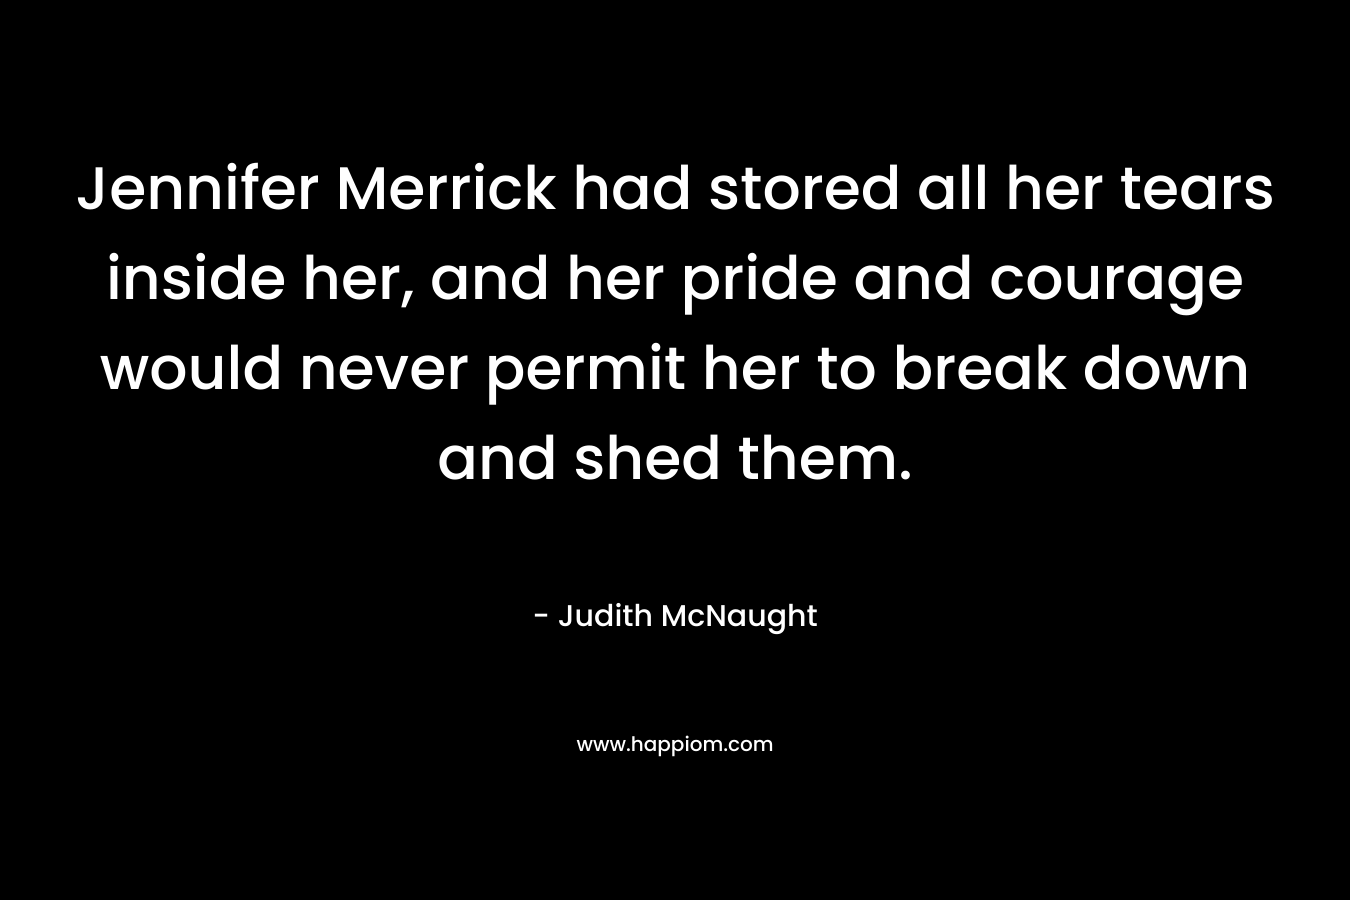 Jennifer Merrick had stored all her tears inside her, and her pride and courage would never permit her to break down and shed them. – Judith McNaught